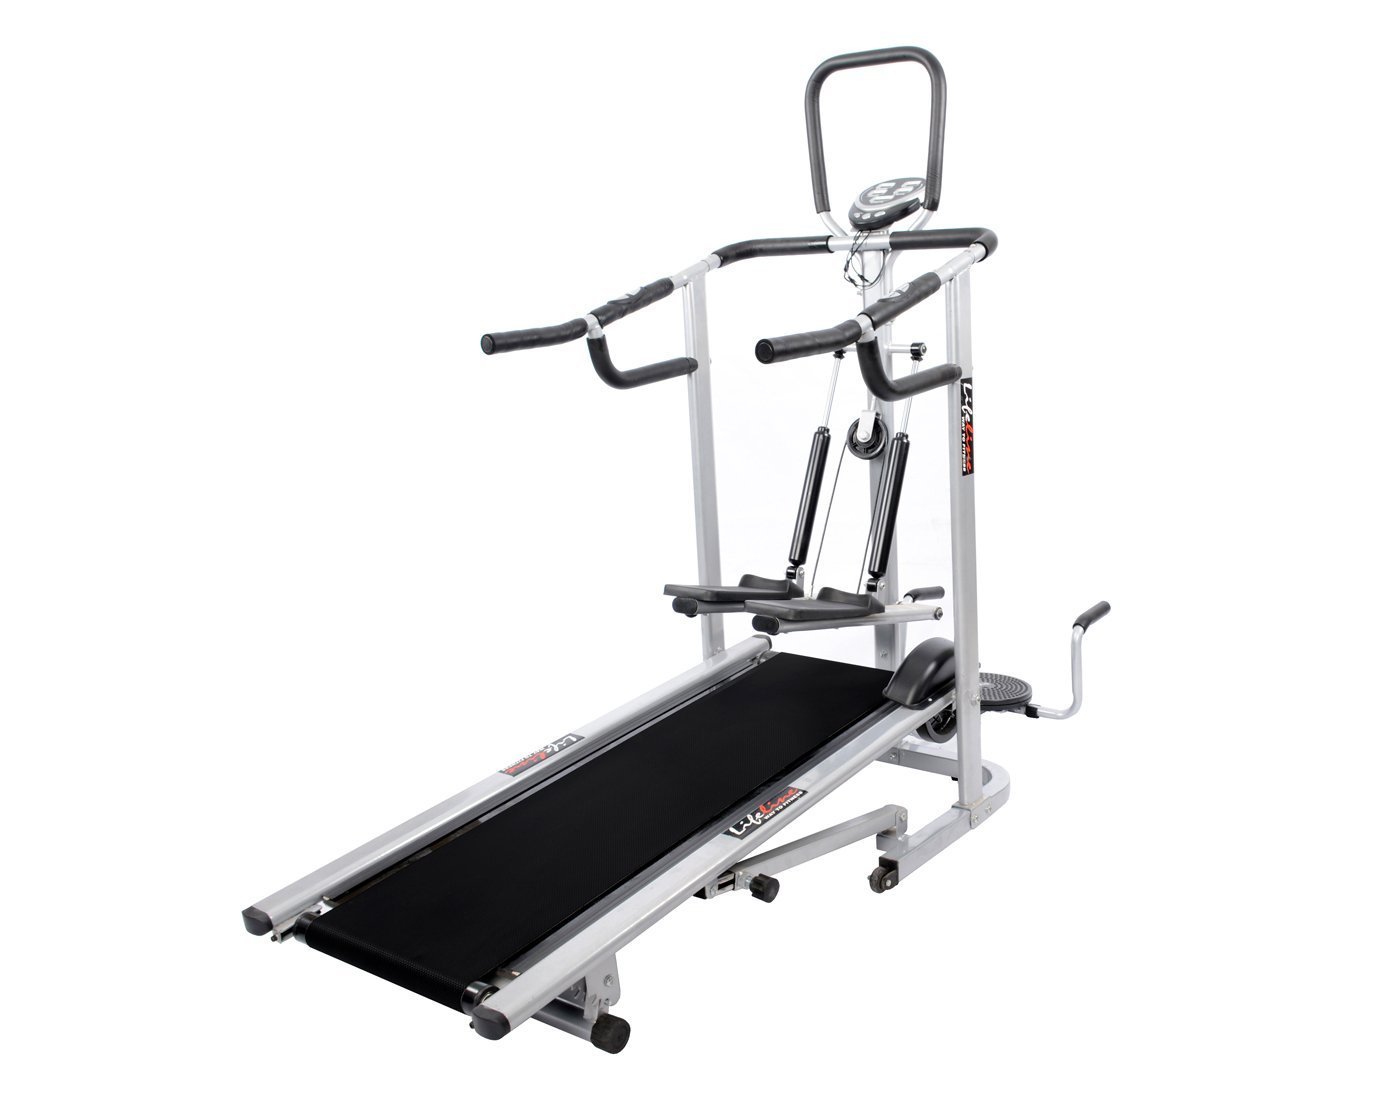 One of the best manual running machines in India